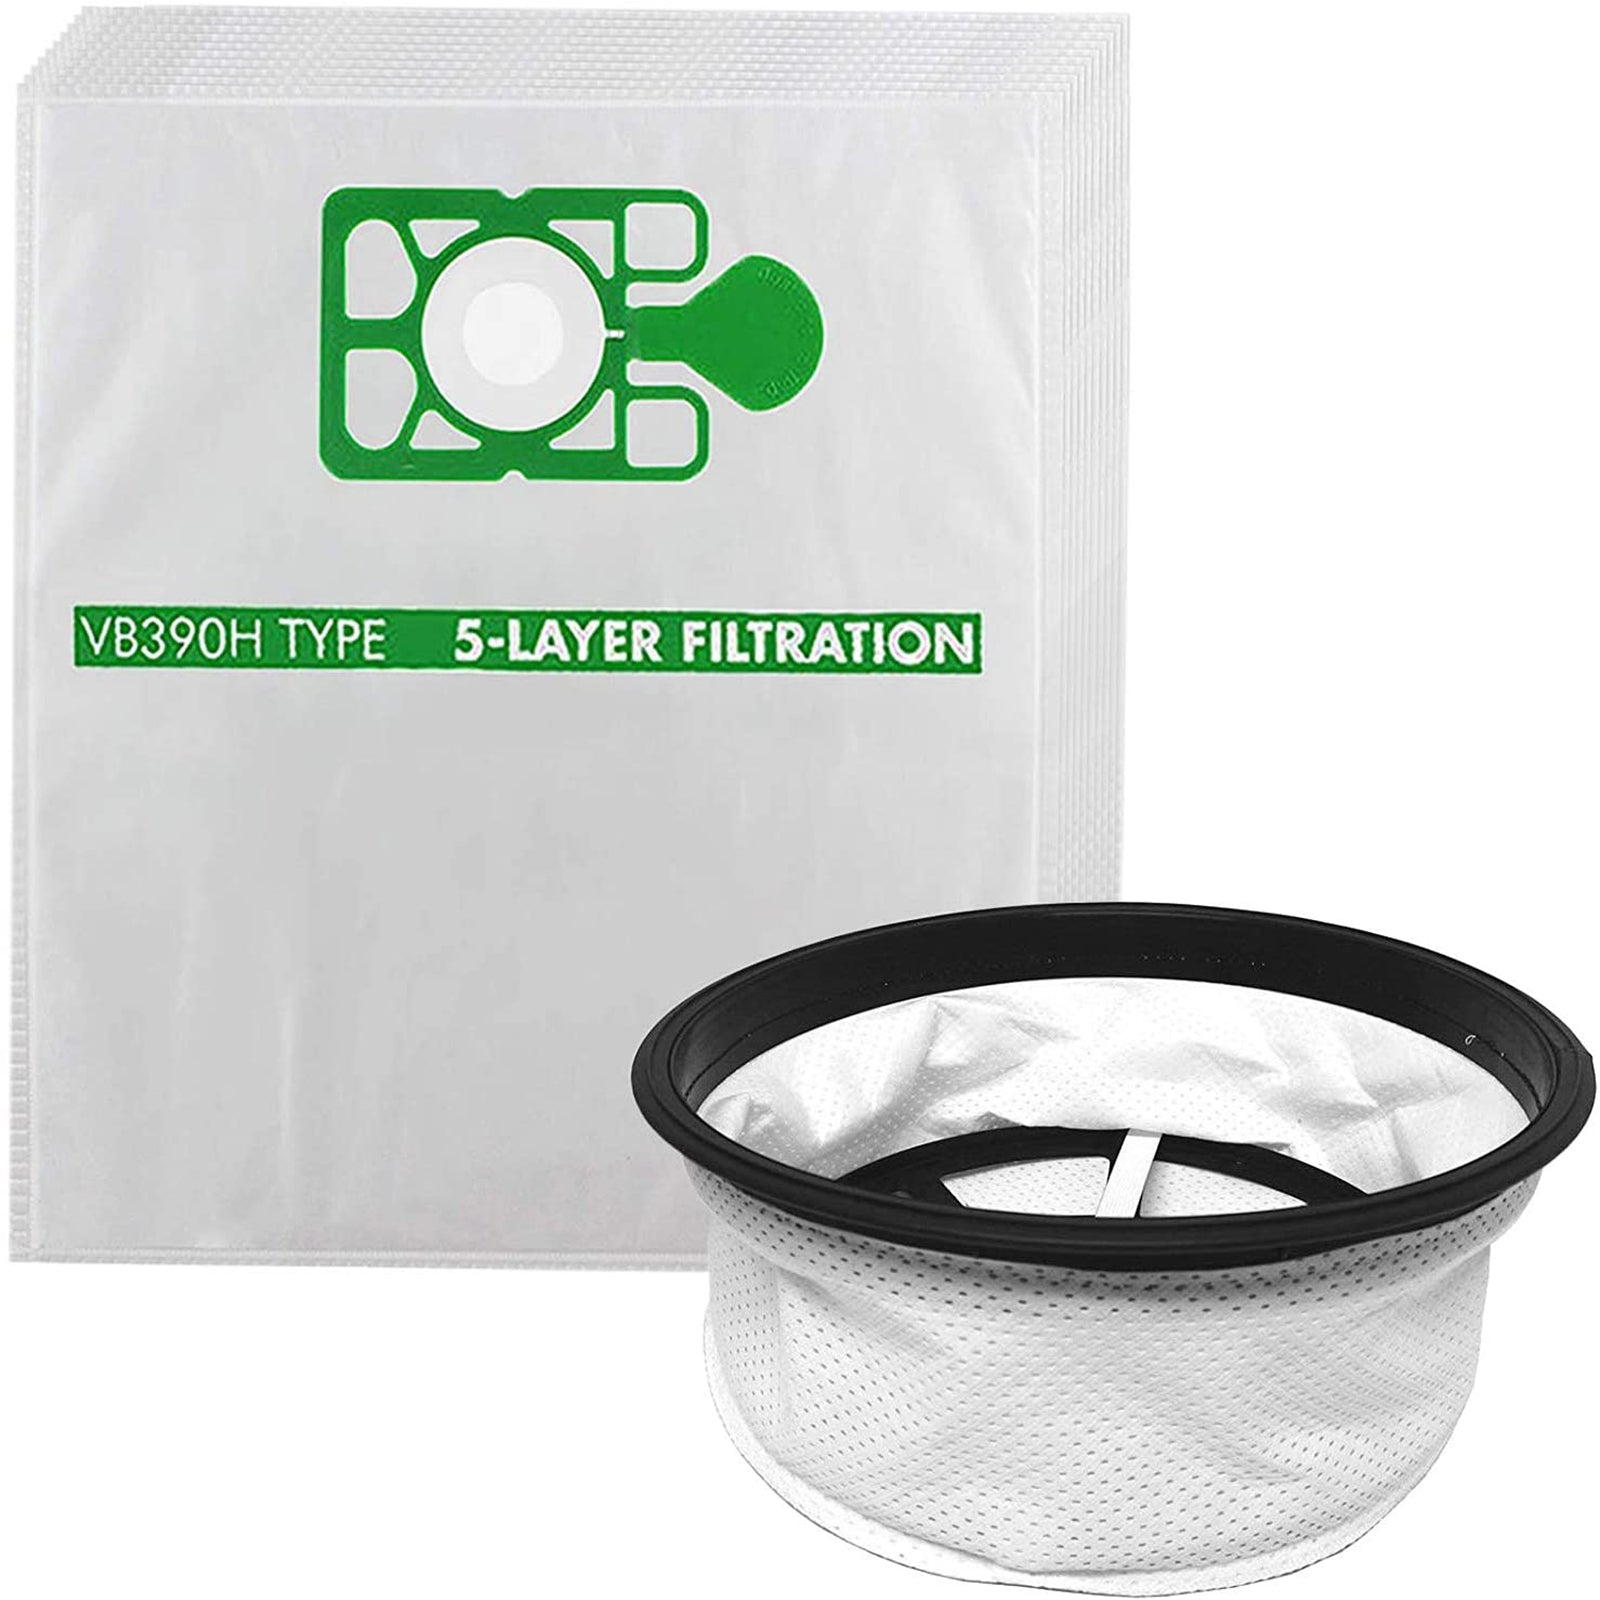 Dust Bags + Cloth Filter 12" compatible with Numatic Henry Hetty Vacuum (10 bags + 1 filter)